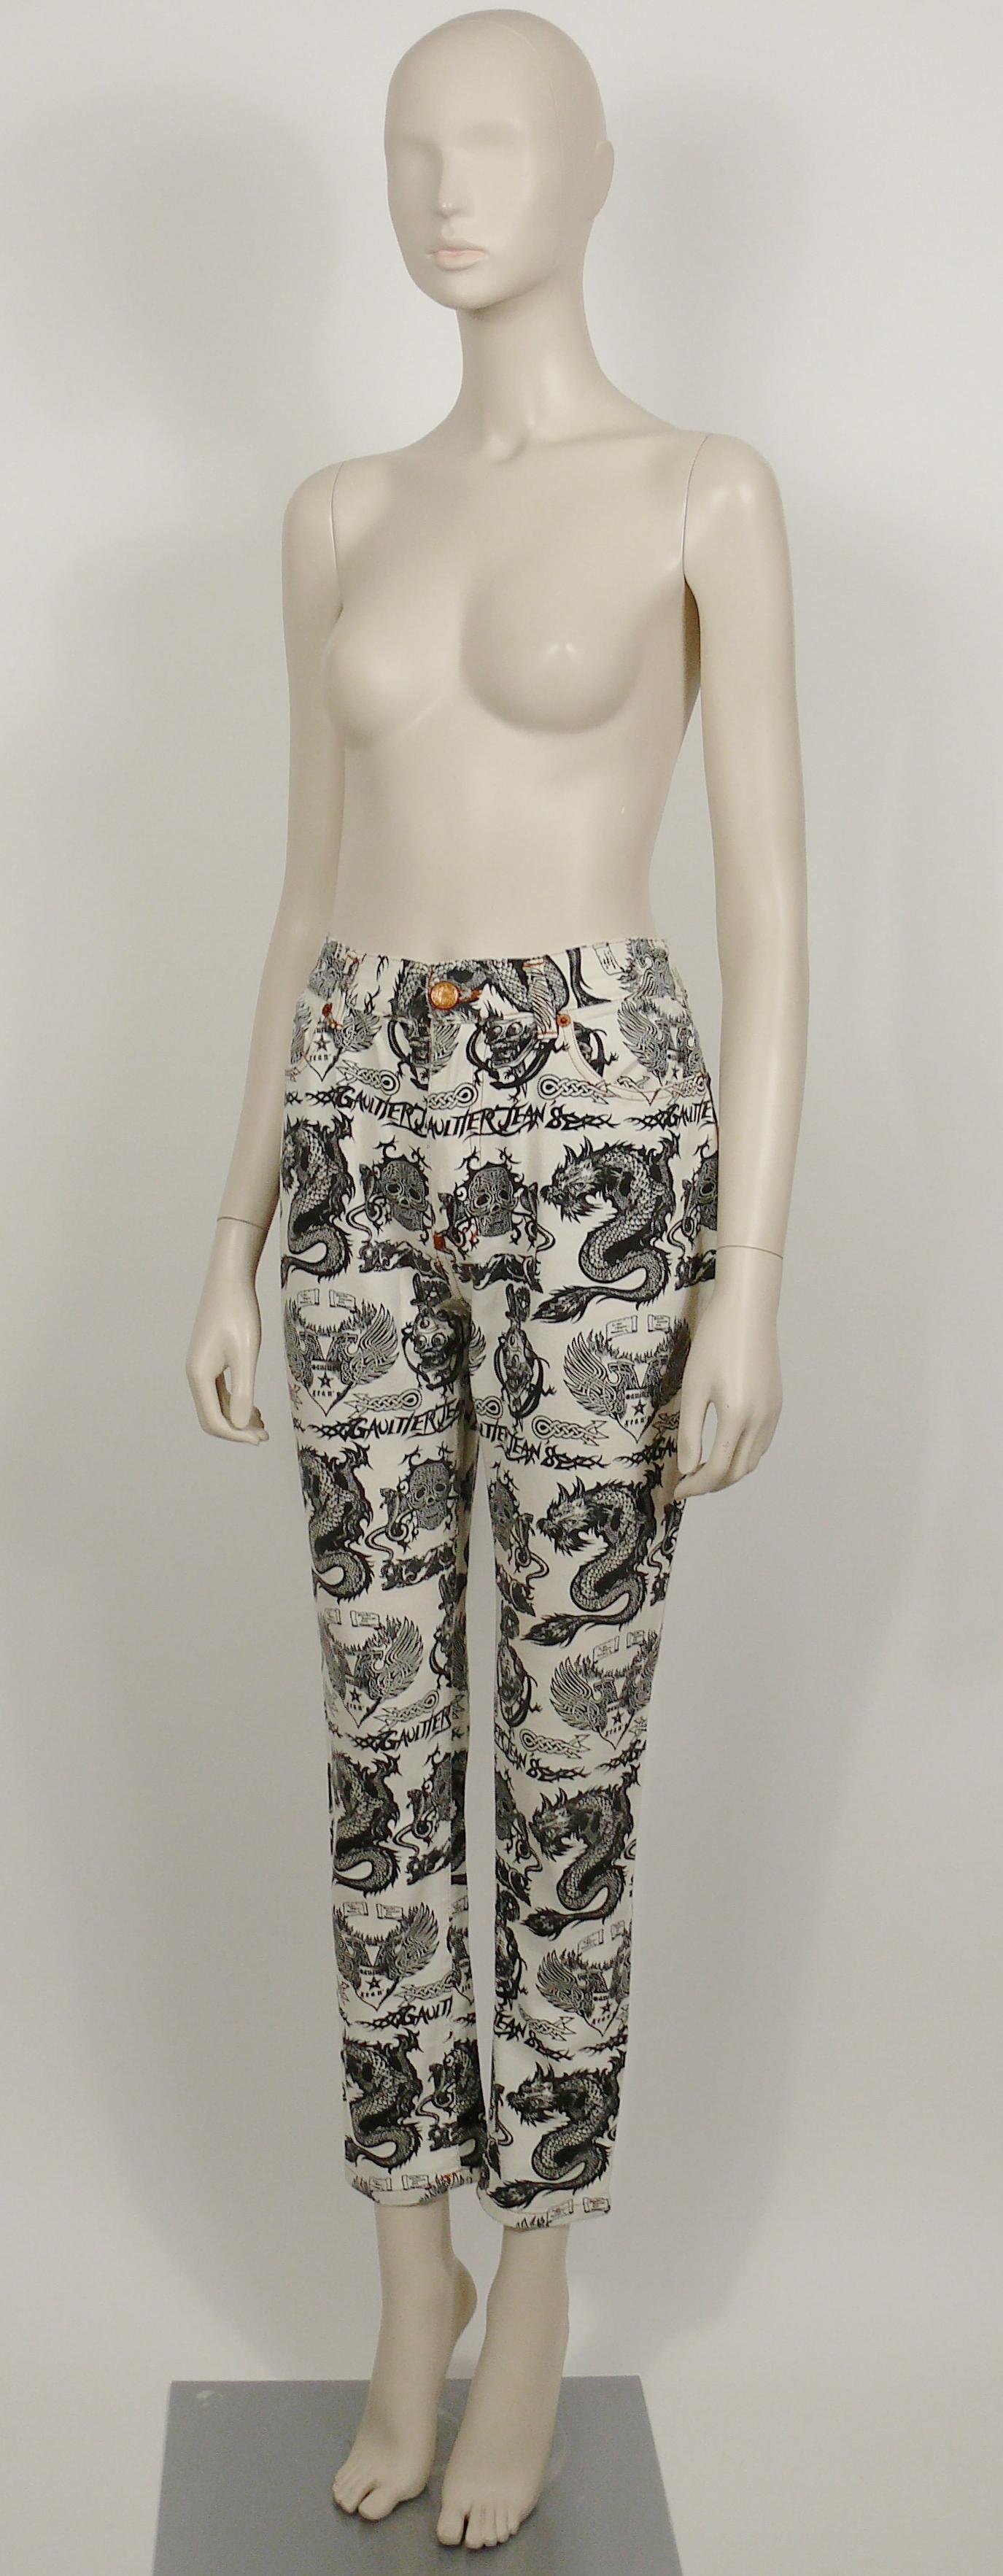 Jean Paul Gaultier Vintage Tattoo Dragon Skull Eagle Pants Trousers In Good Condition For Sale In Nice, FR